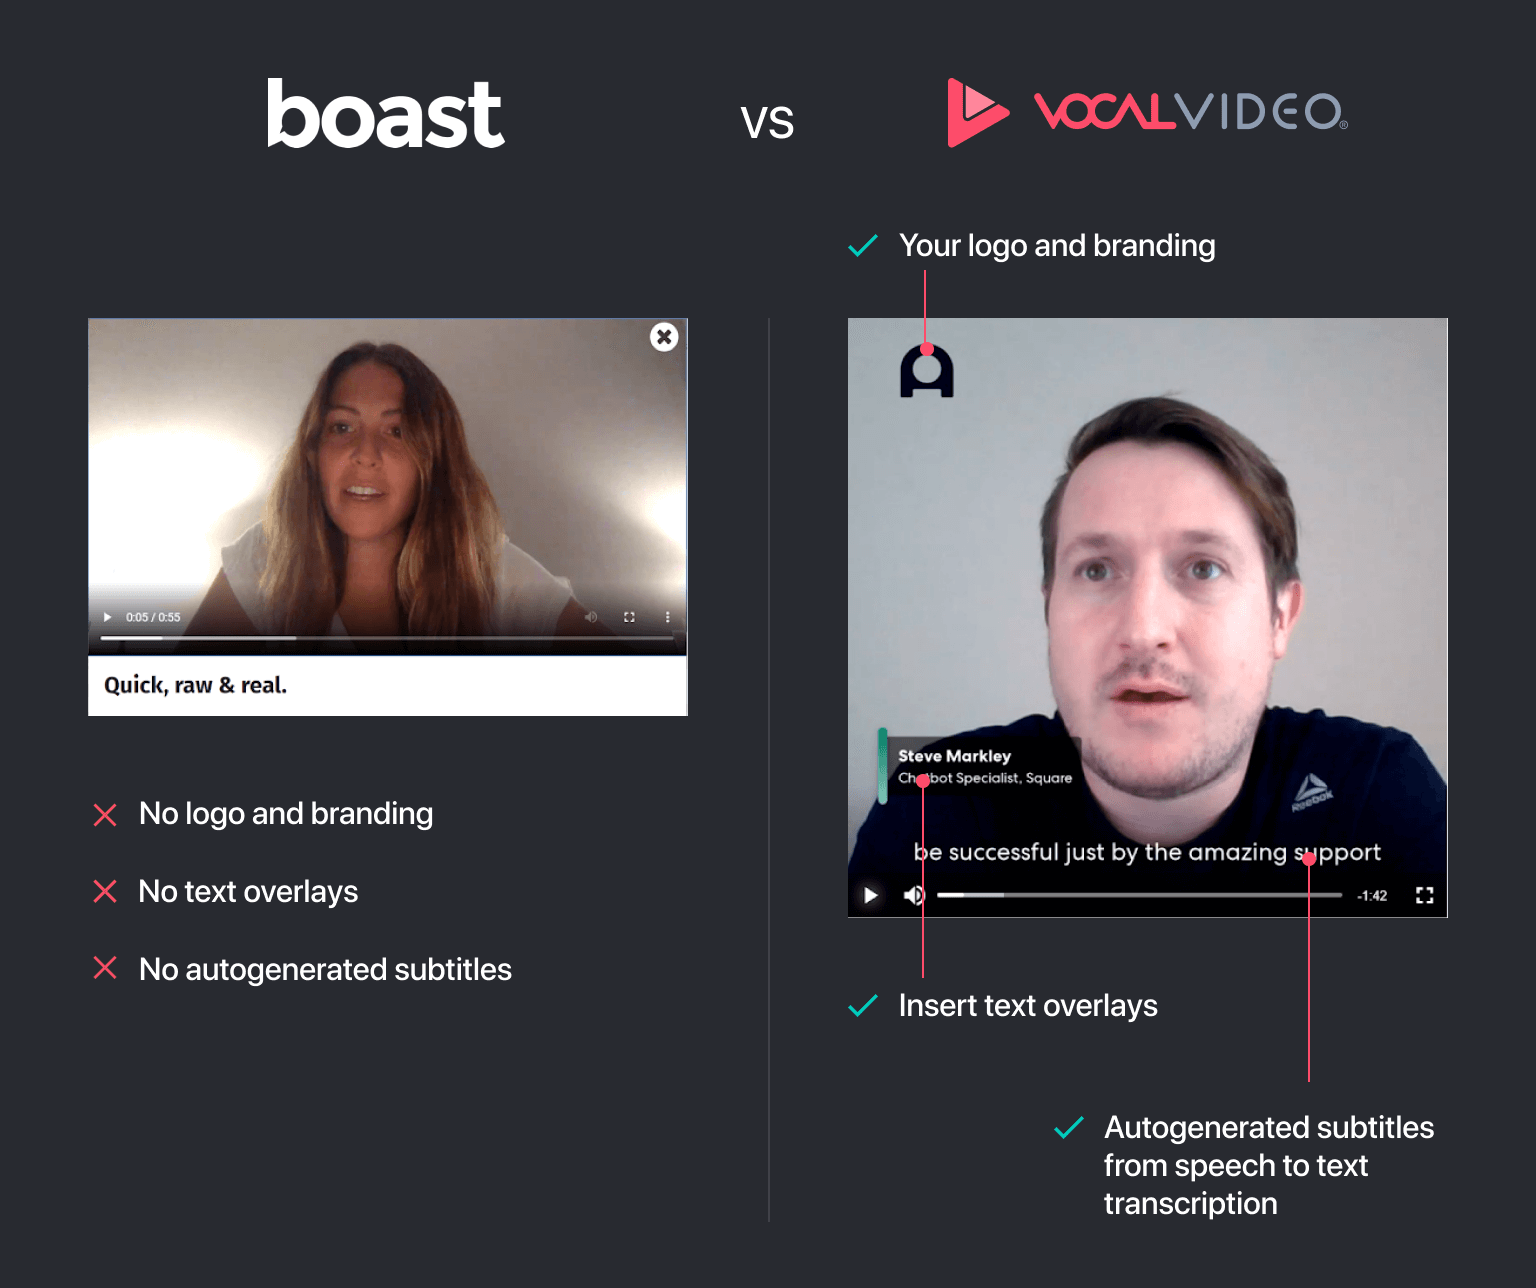 Boast.io vs Vocal Video: With Vocal Video, you can insert your logo and branding, text overlays and autogenerated subtitles from speech to text transcription.